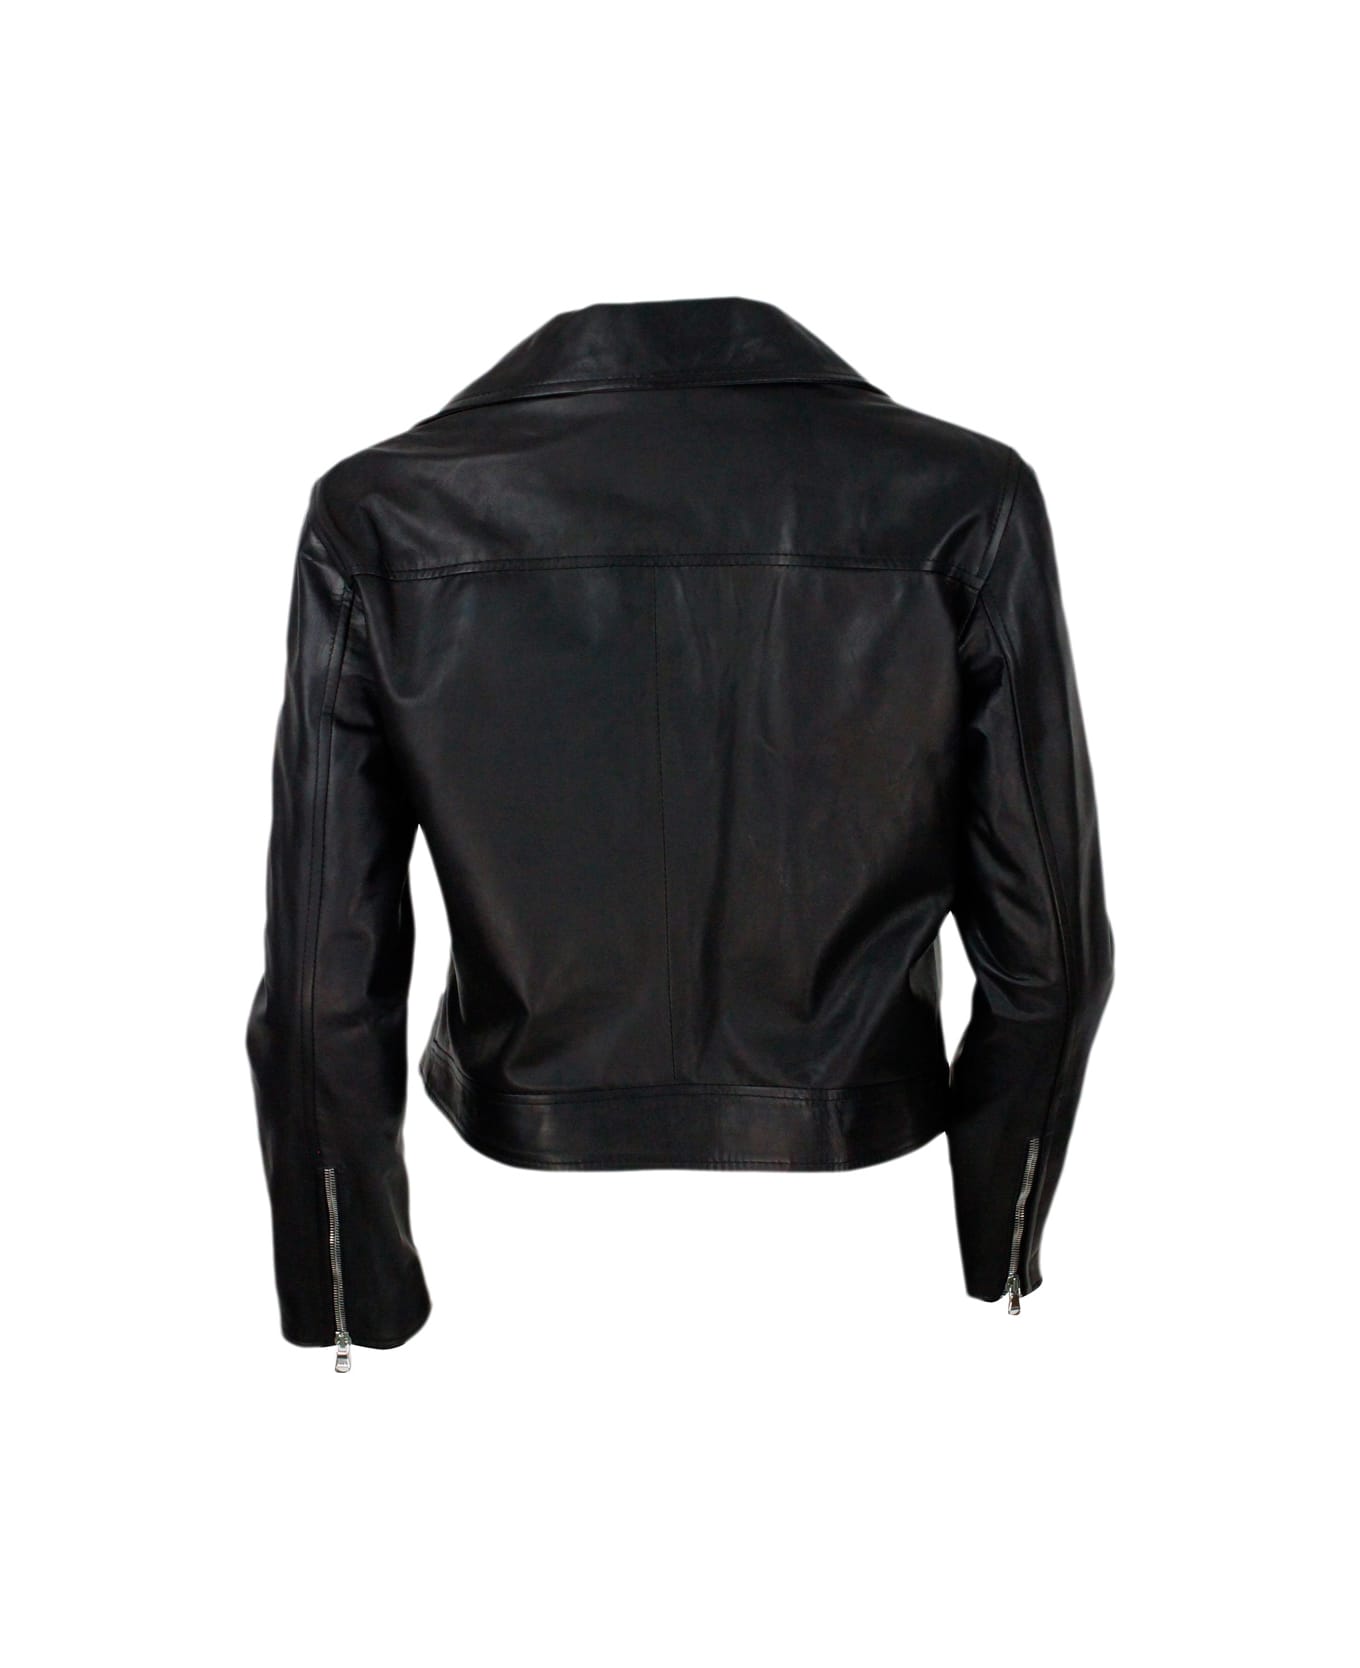 Barba Napoli Studded Jacket In Fine And Soft Nappa Leather With Zip Closure - Black